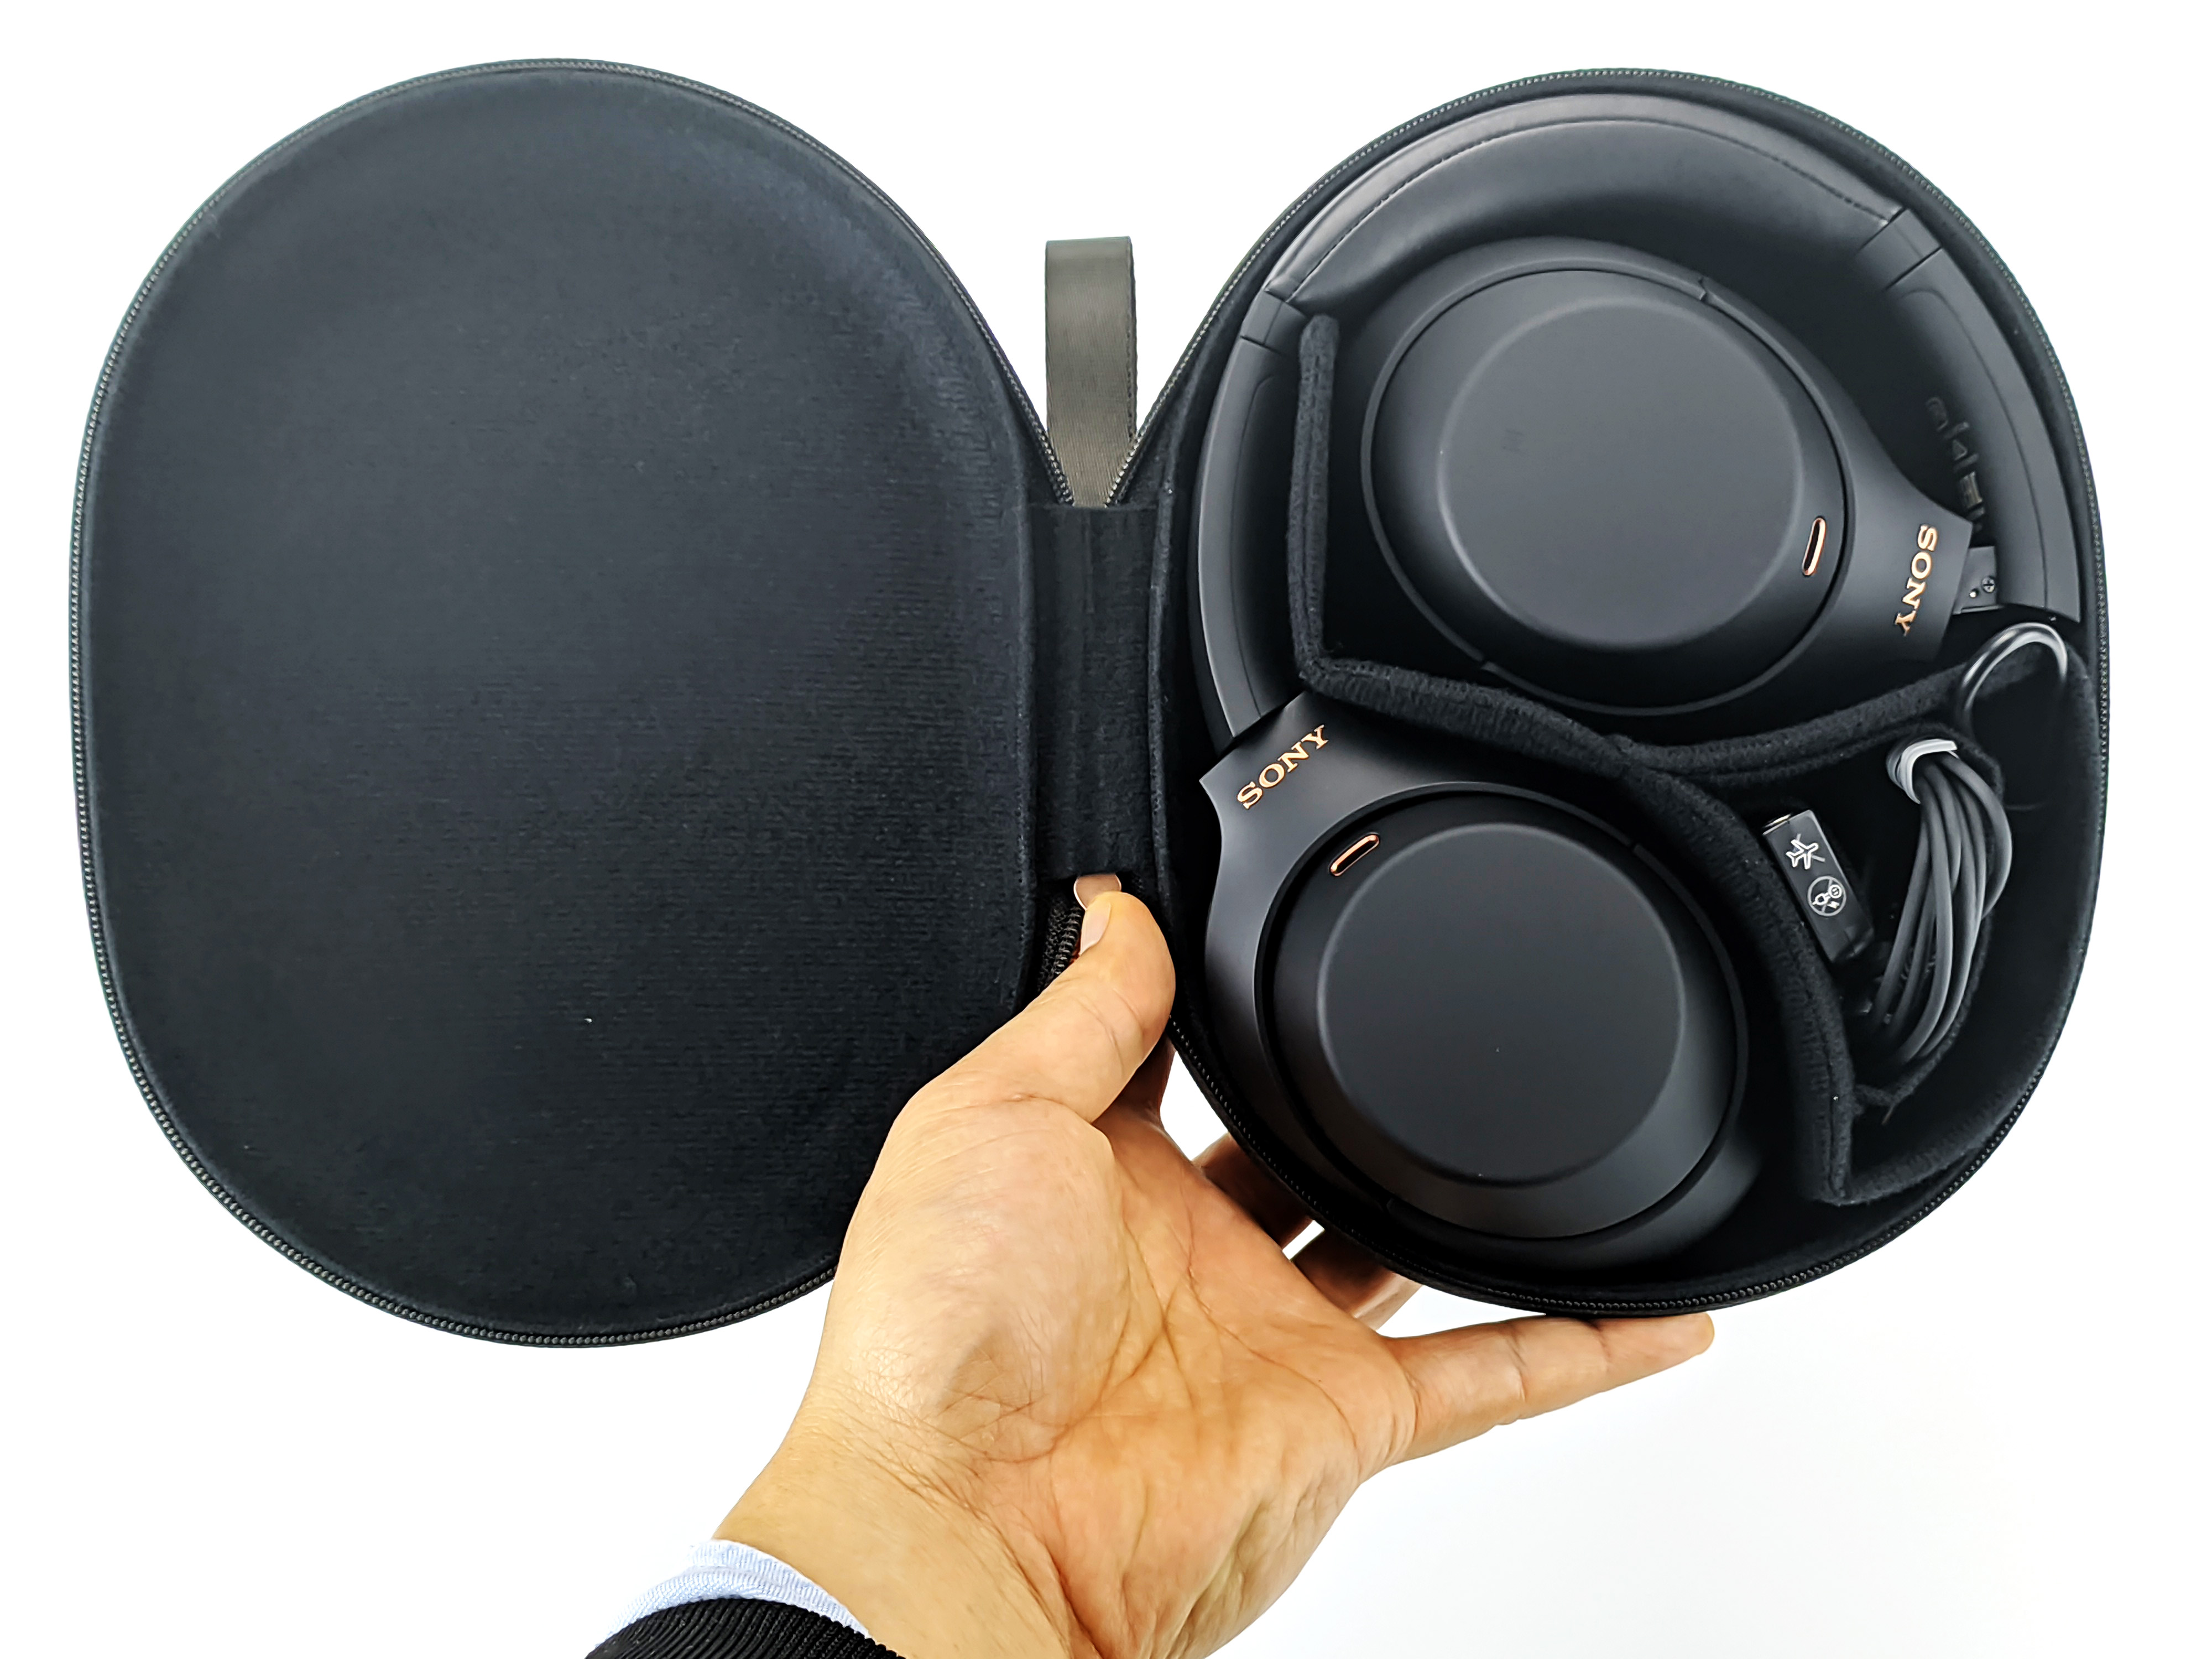 Sony Wireless Headphone WH-1000XM4 Hands-on Review: The Best Even